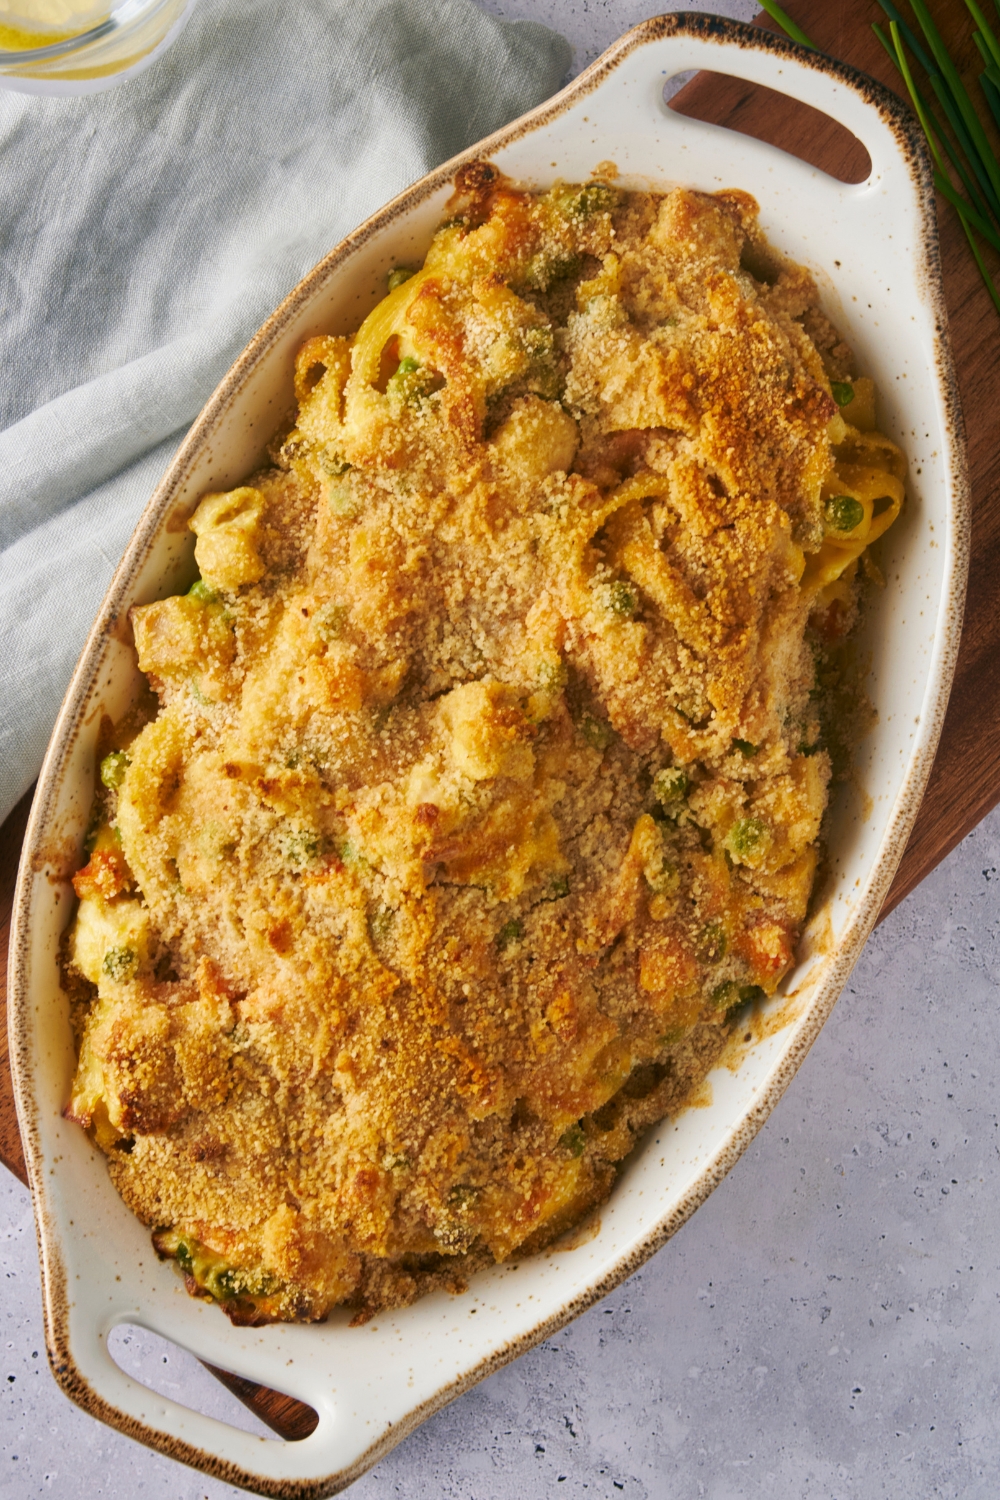 A casserole dish with chicken noodle casserole baked to golden brown.